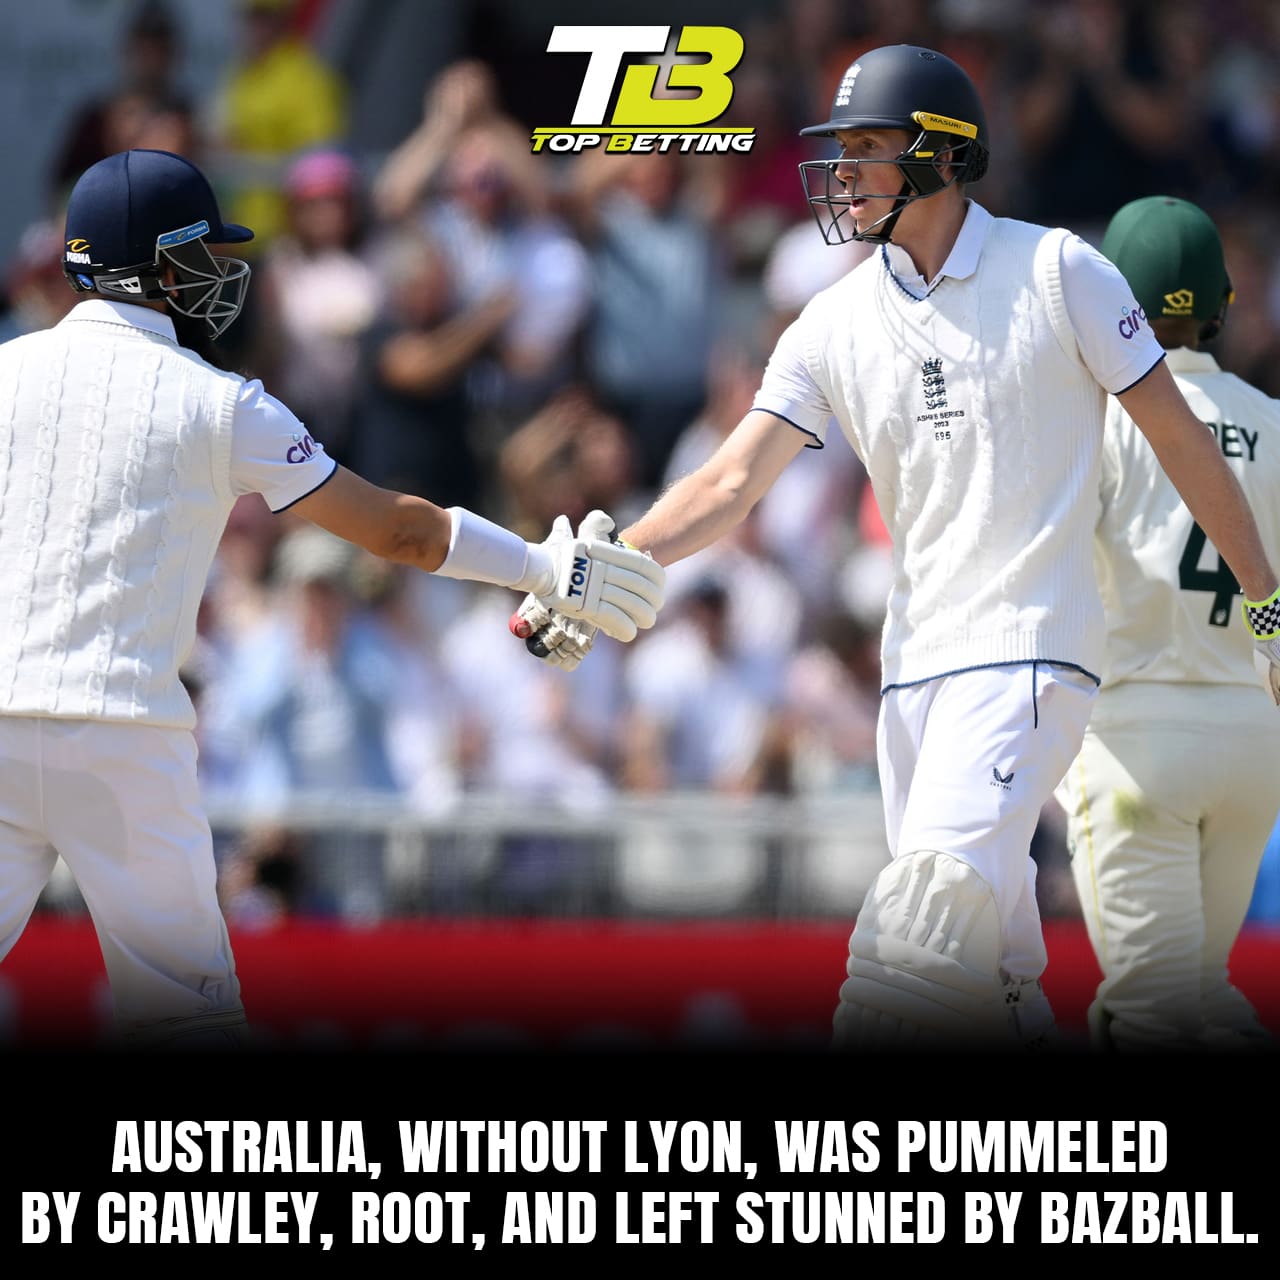 Australia, without Lyon, was pummeled by Crawley, Root, and left stunned by Bazball.